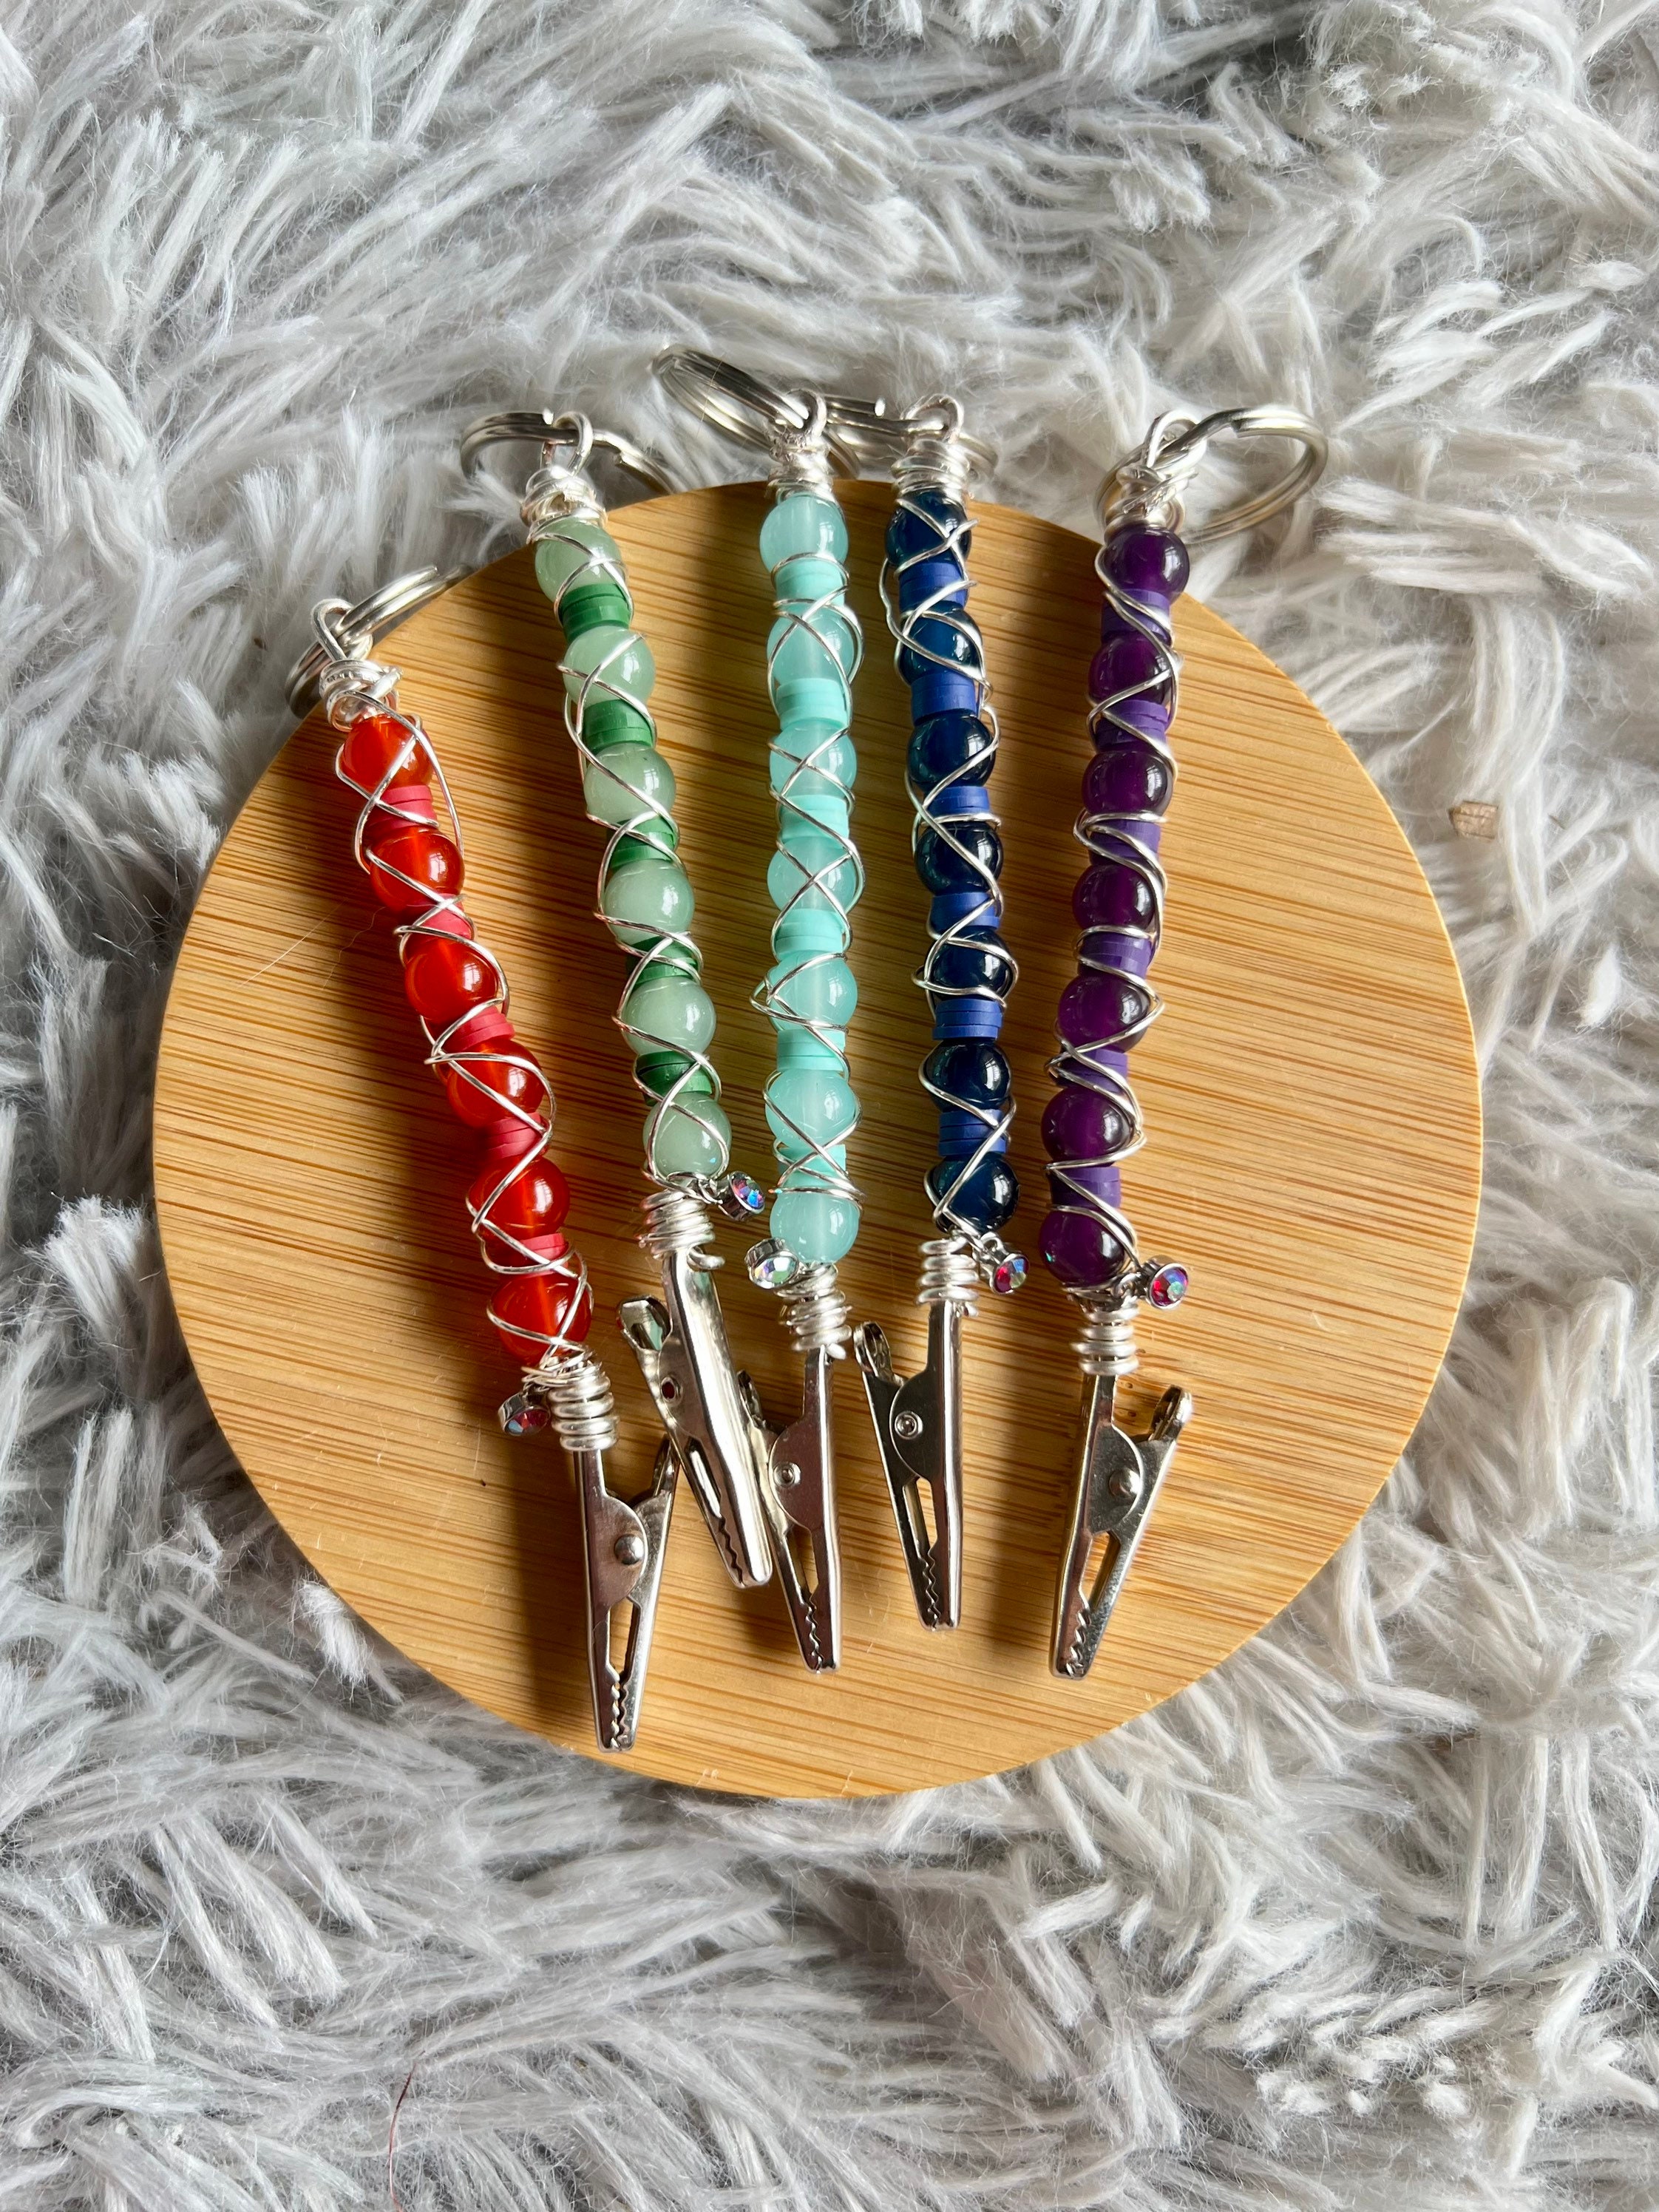 HAND CRAFTED WOODEN ROACH CLIPS (PERFECT FOR MOON ROCK JOINTS